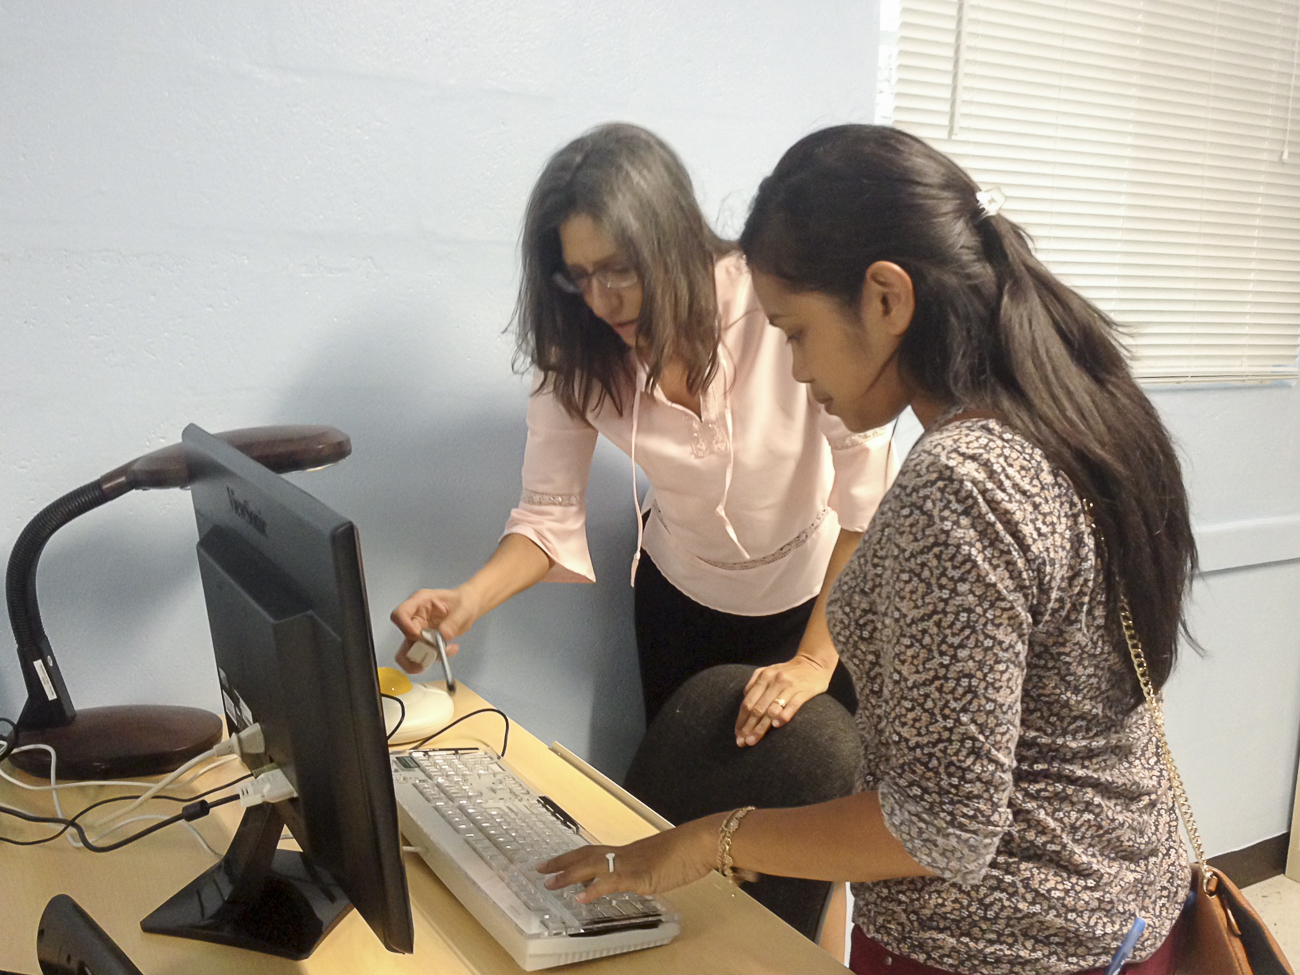 On August 17, Nancy Swamy, a case manager at Westcare Pacific Islands Inc., and Clarissa Wilson (right) explored various Assistive Technology options that can be used in their organization to facilitate access for their clients.